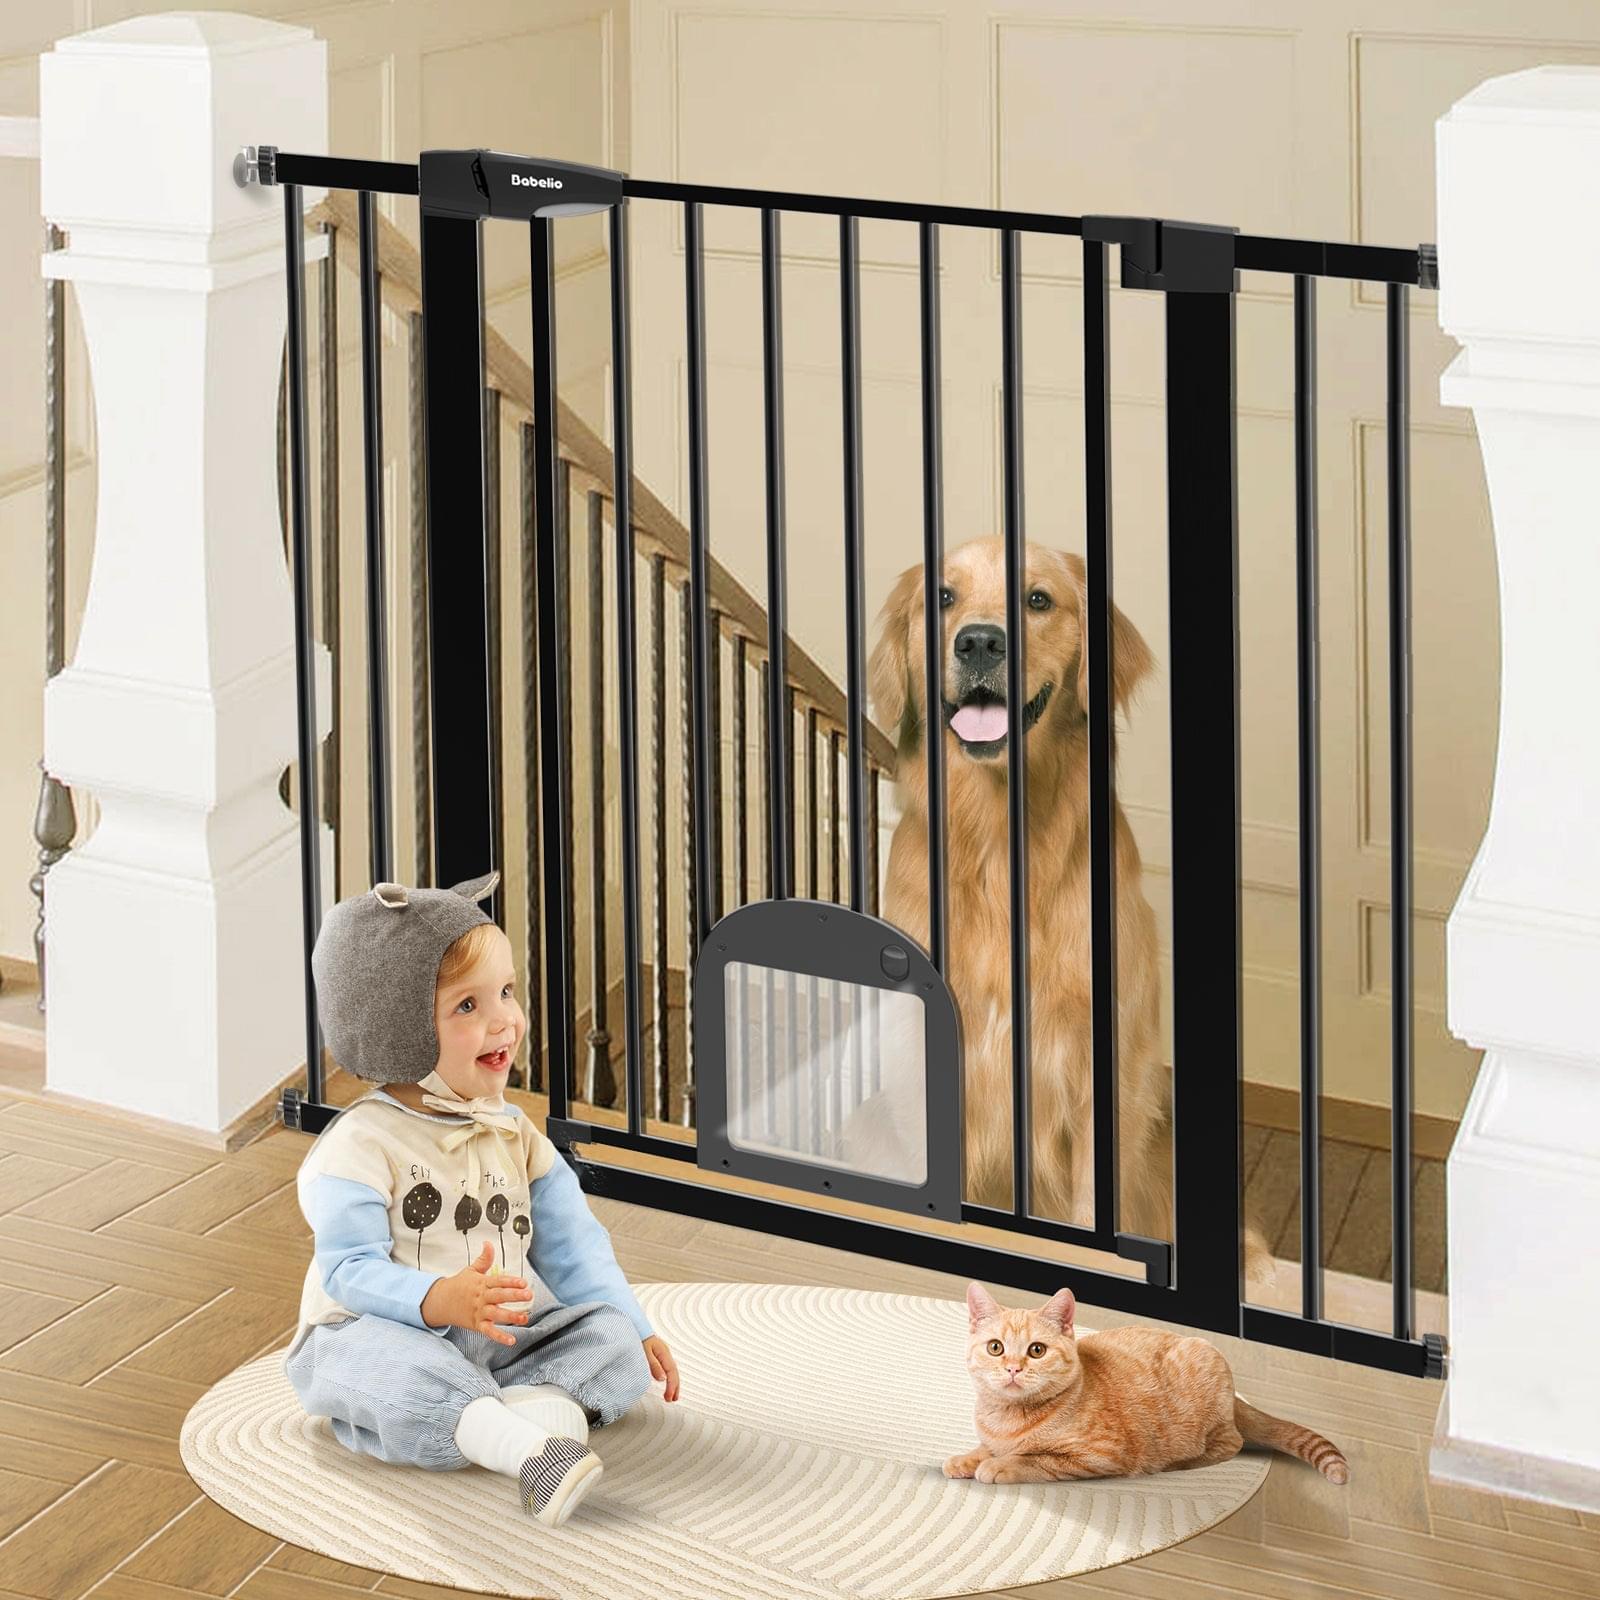 Babelio 36" Tall Upgraded Baby Gate with Cat Door, 29-43" Auto Close Durable Dog Gate for Stairs, Doorways and House, White - babeliobaby